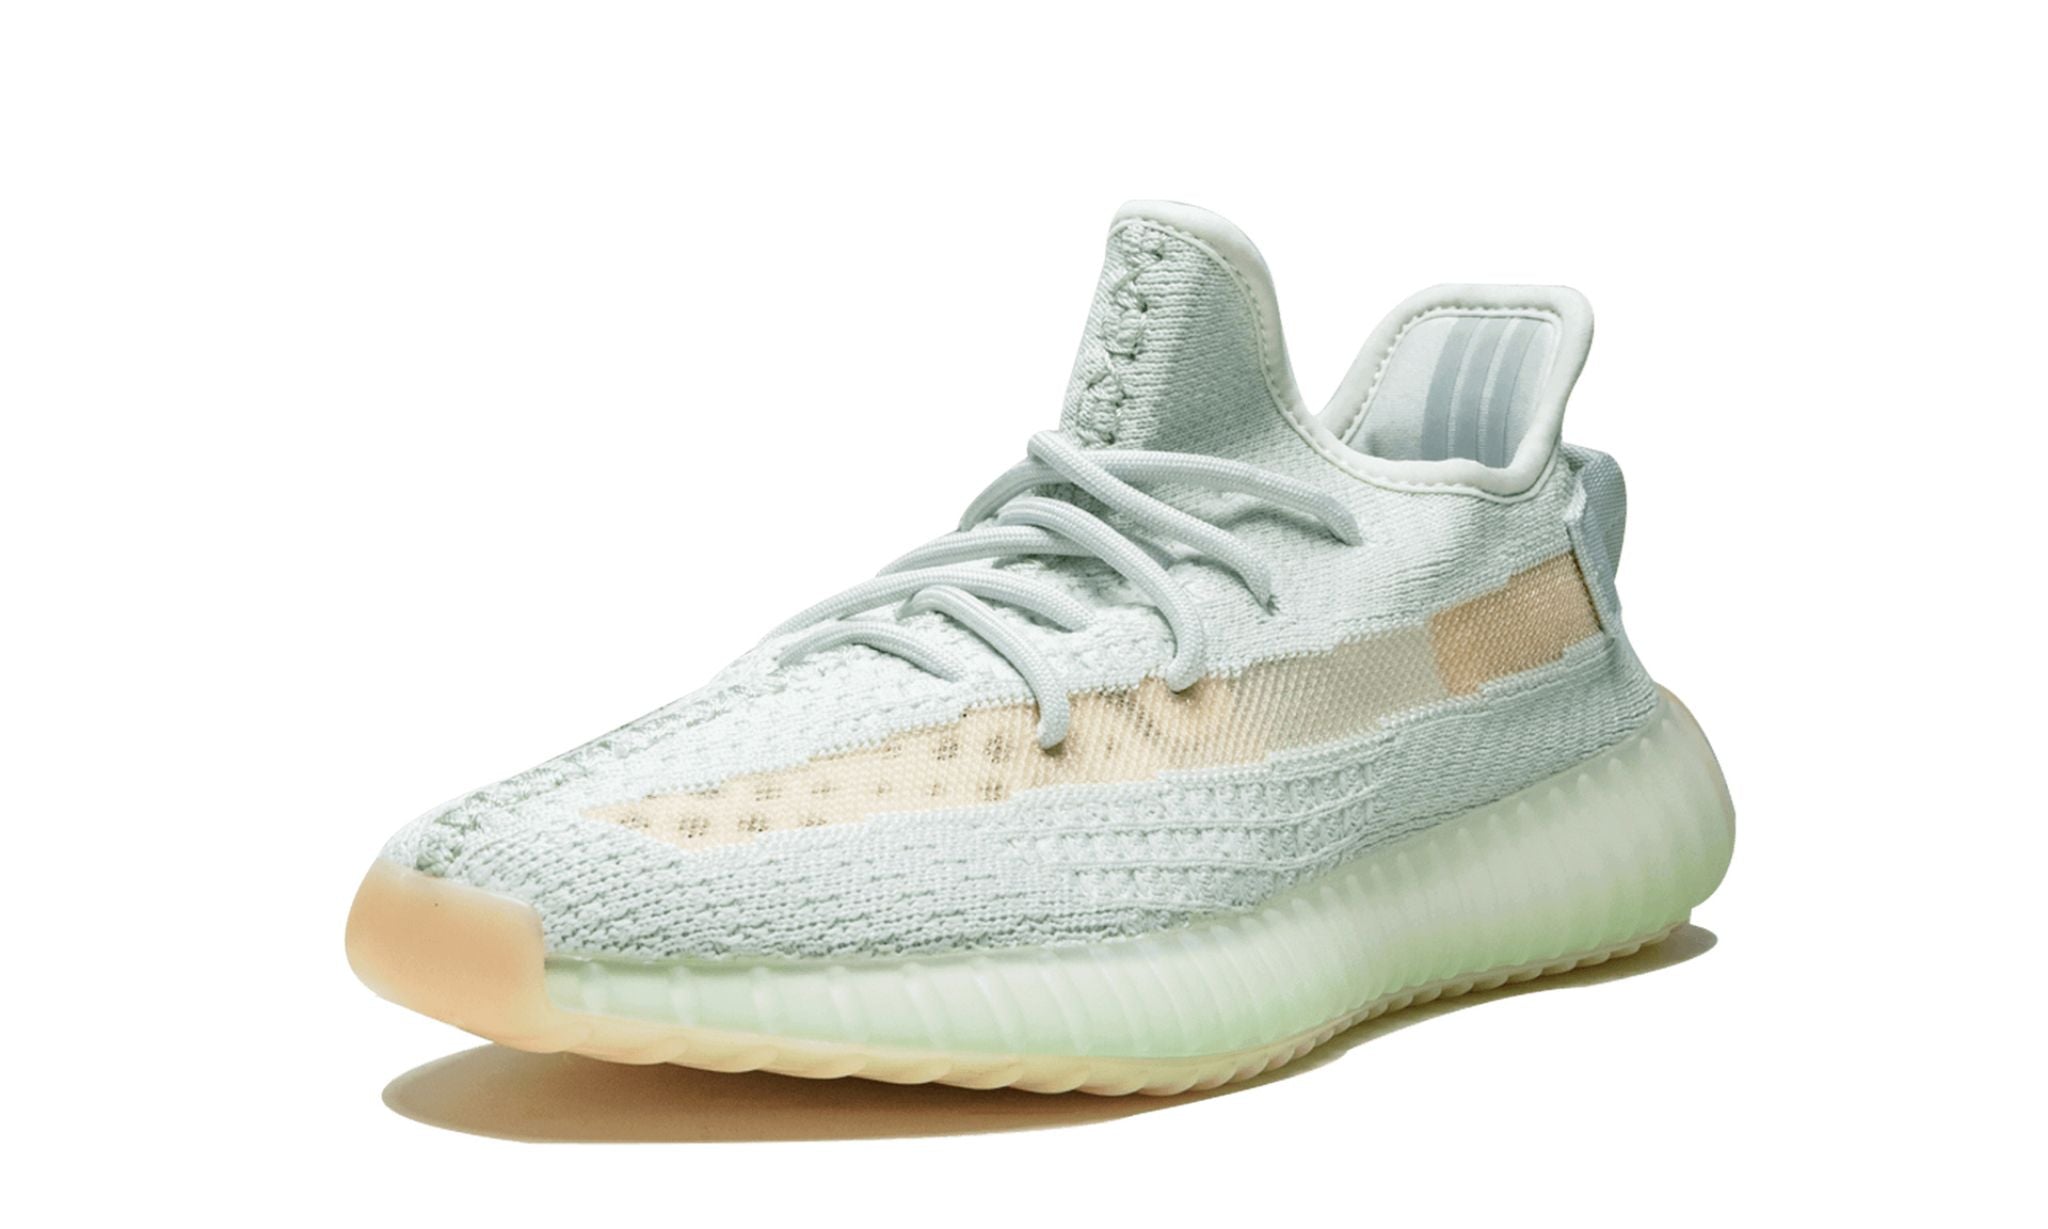 Adidas Yeezy Boost 350 V2 “Hyperspace”